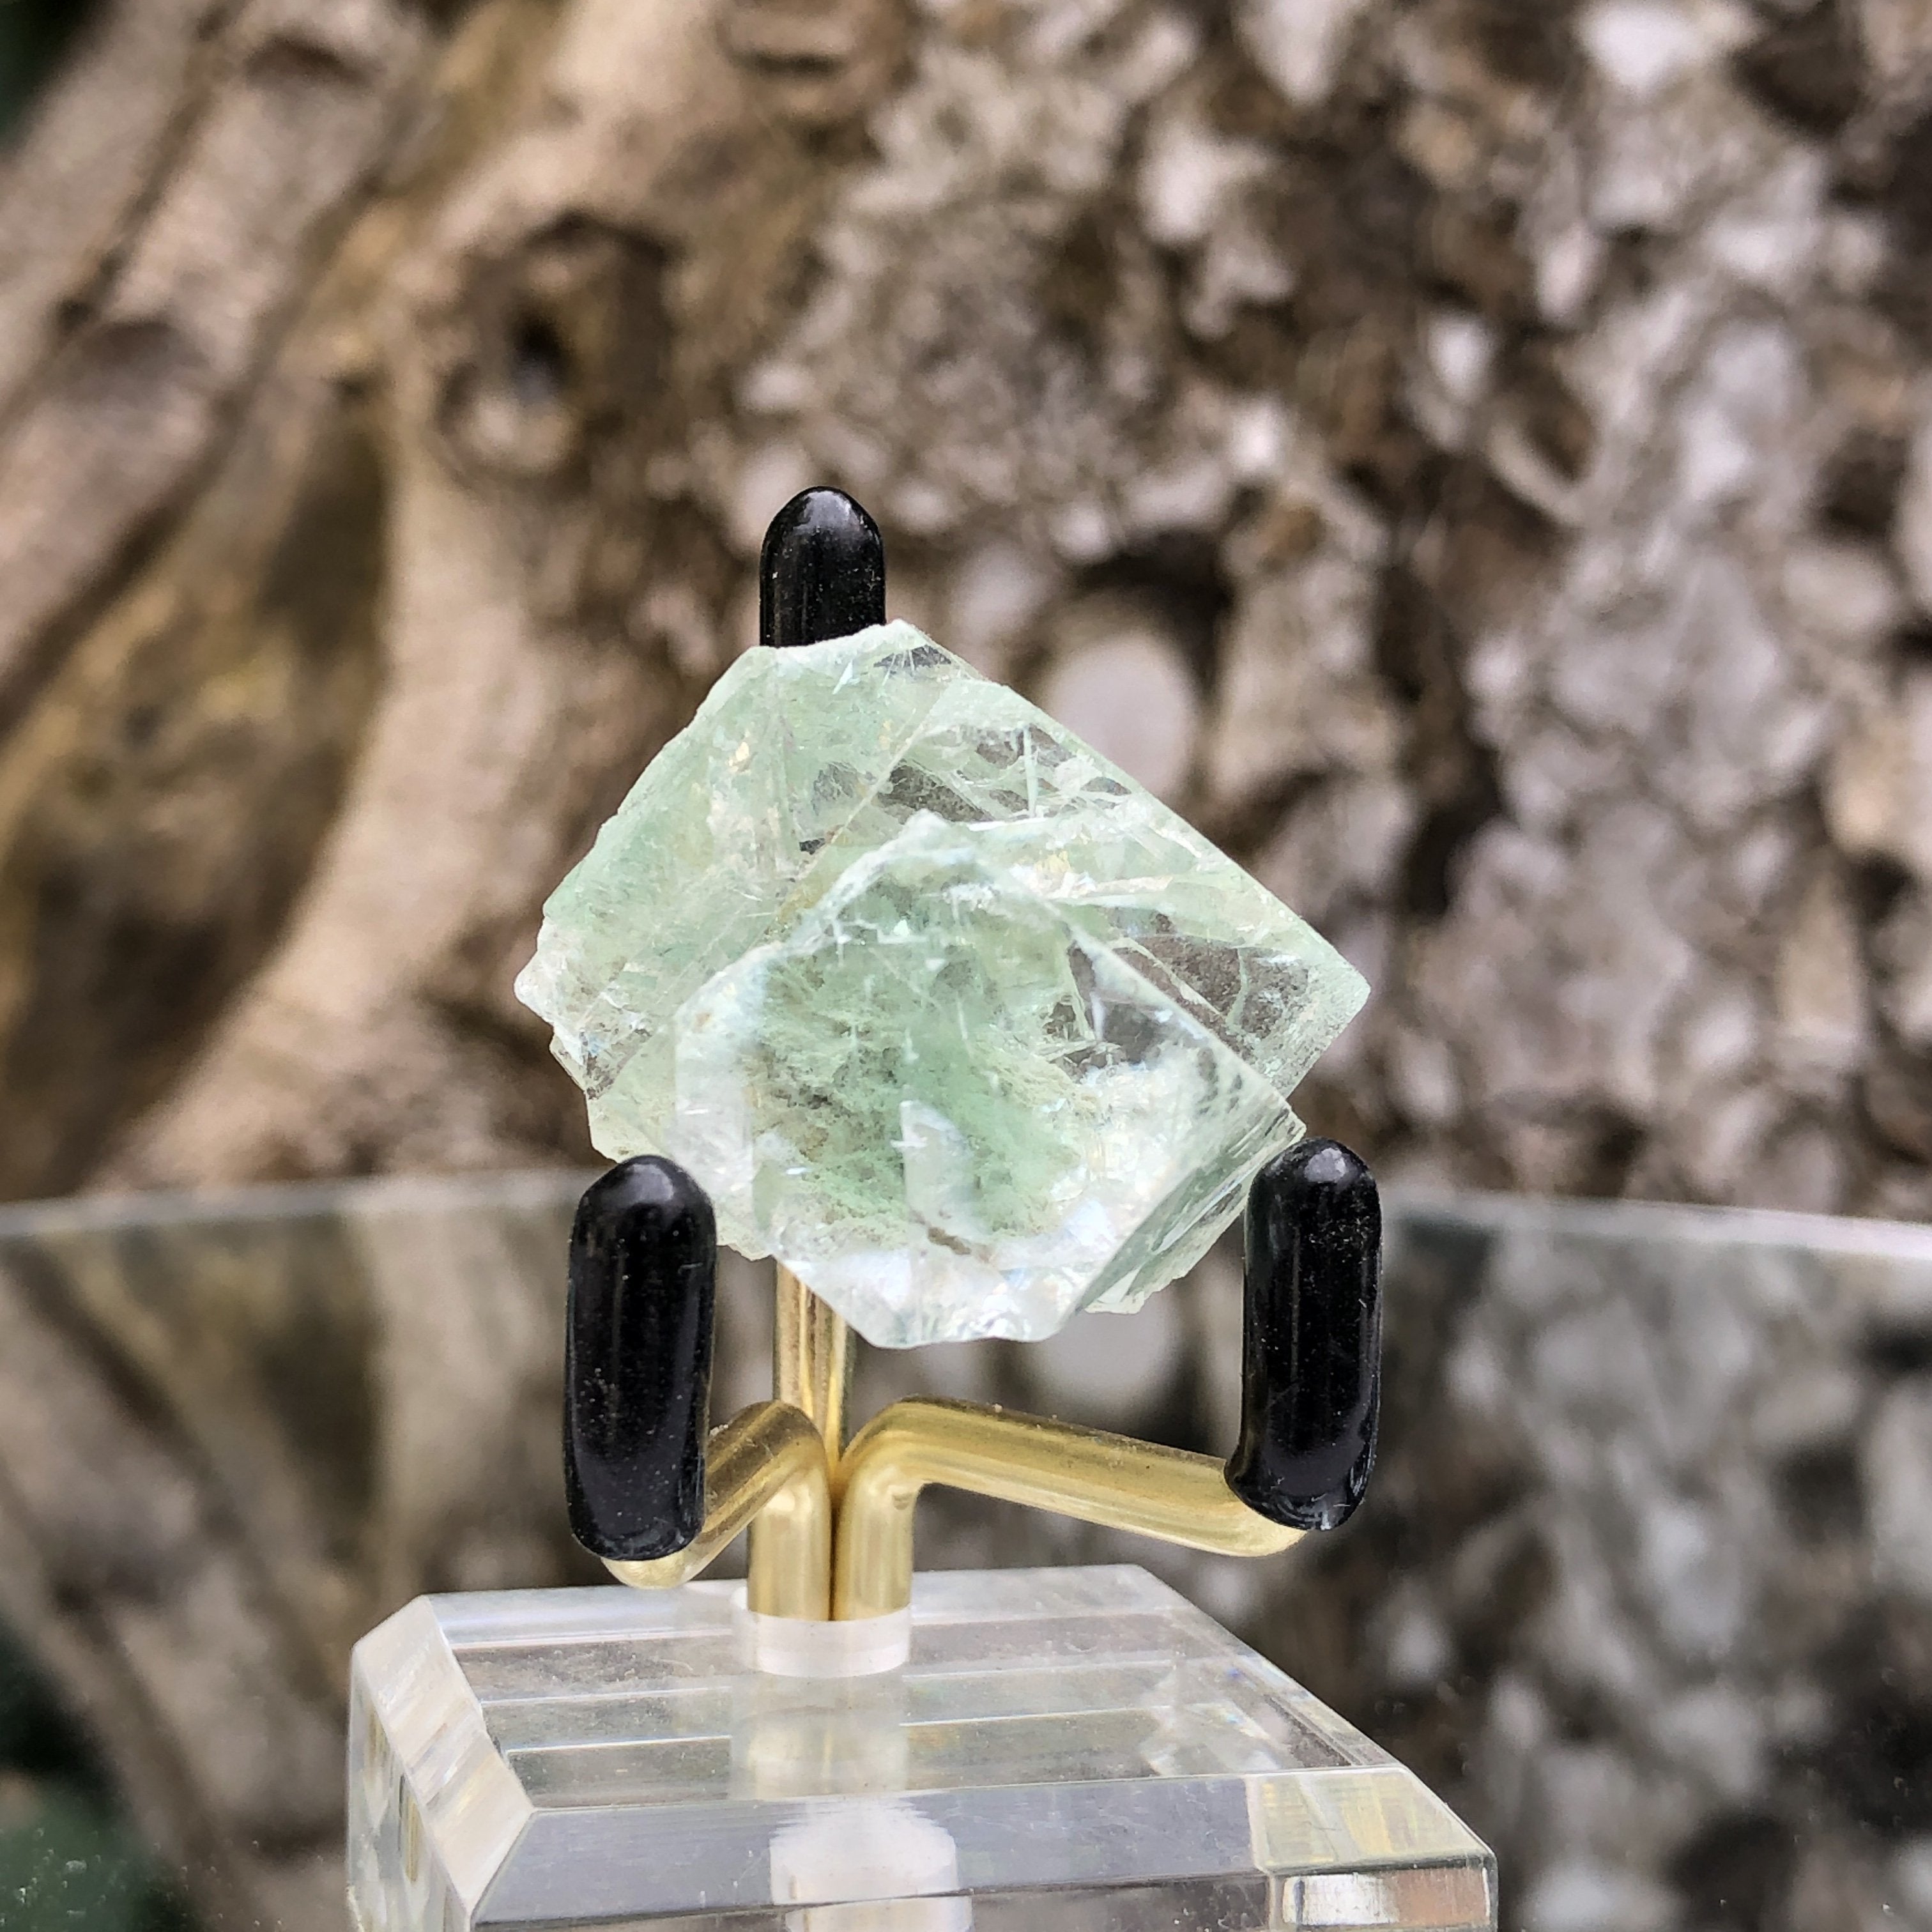 14g 3x3x2cm Glass Green and Clear Fluorite from Xianghualing,Hunan,CHINA - Locco Decor